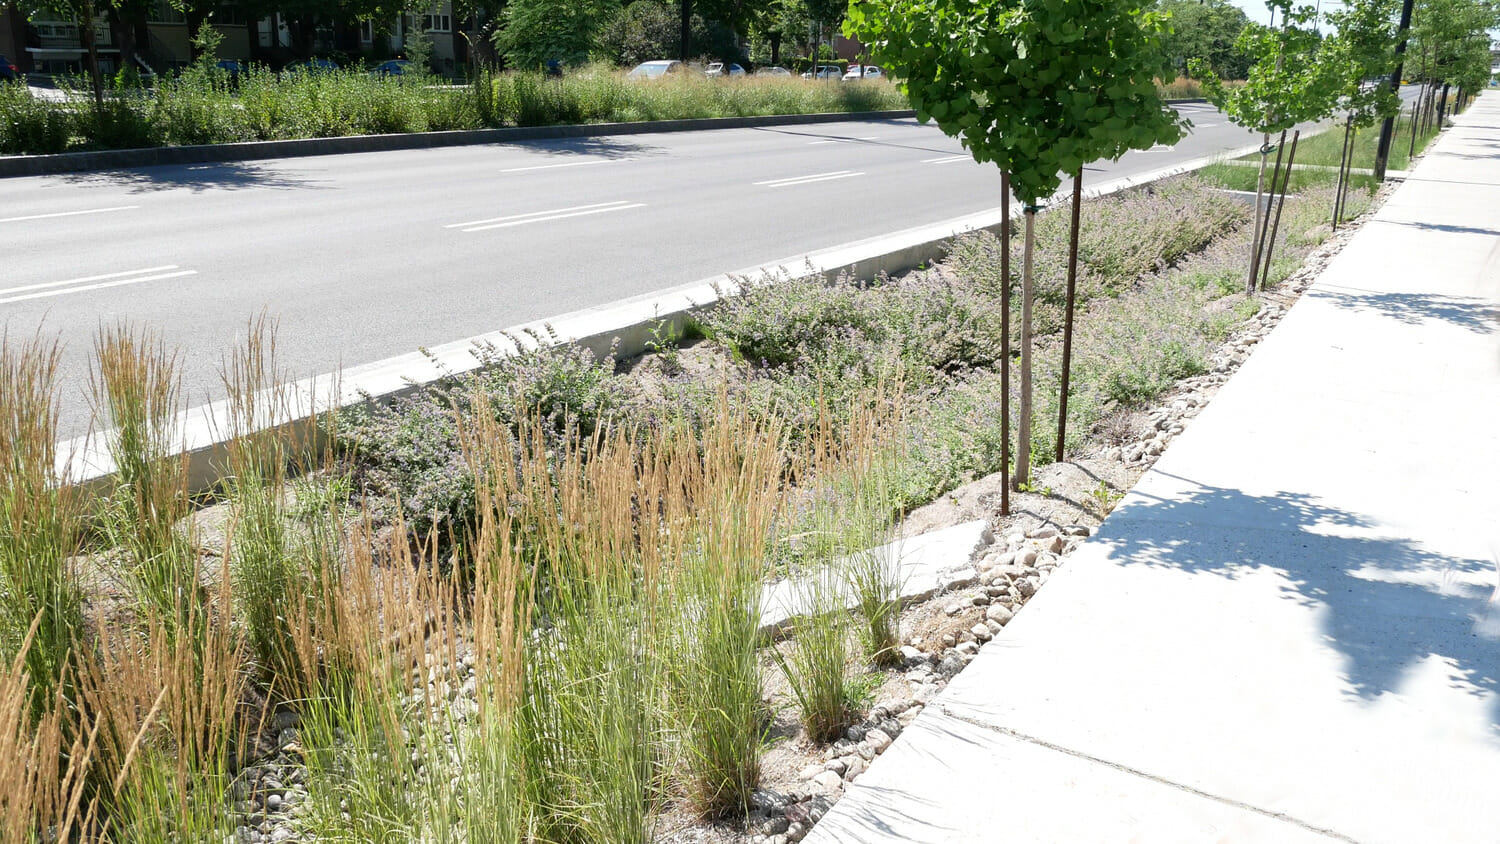 A sidewalk with grass and trees next to it.